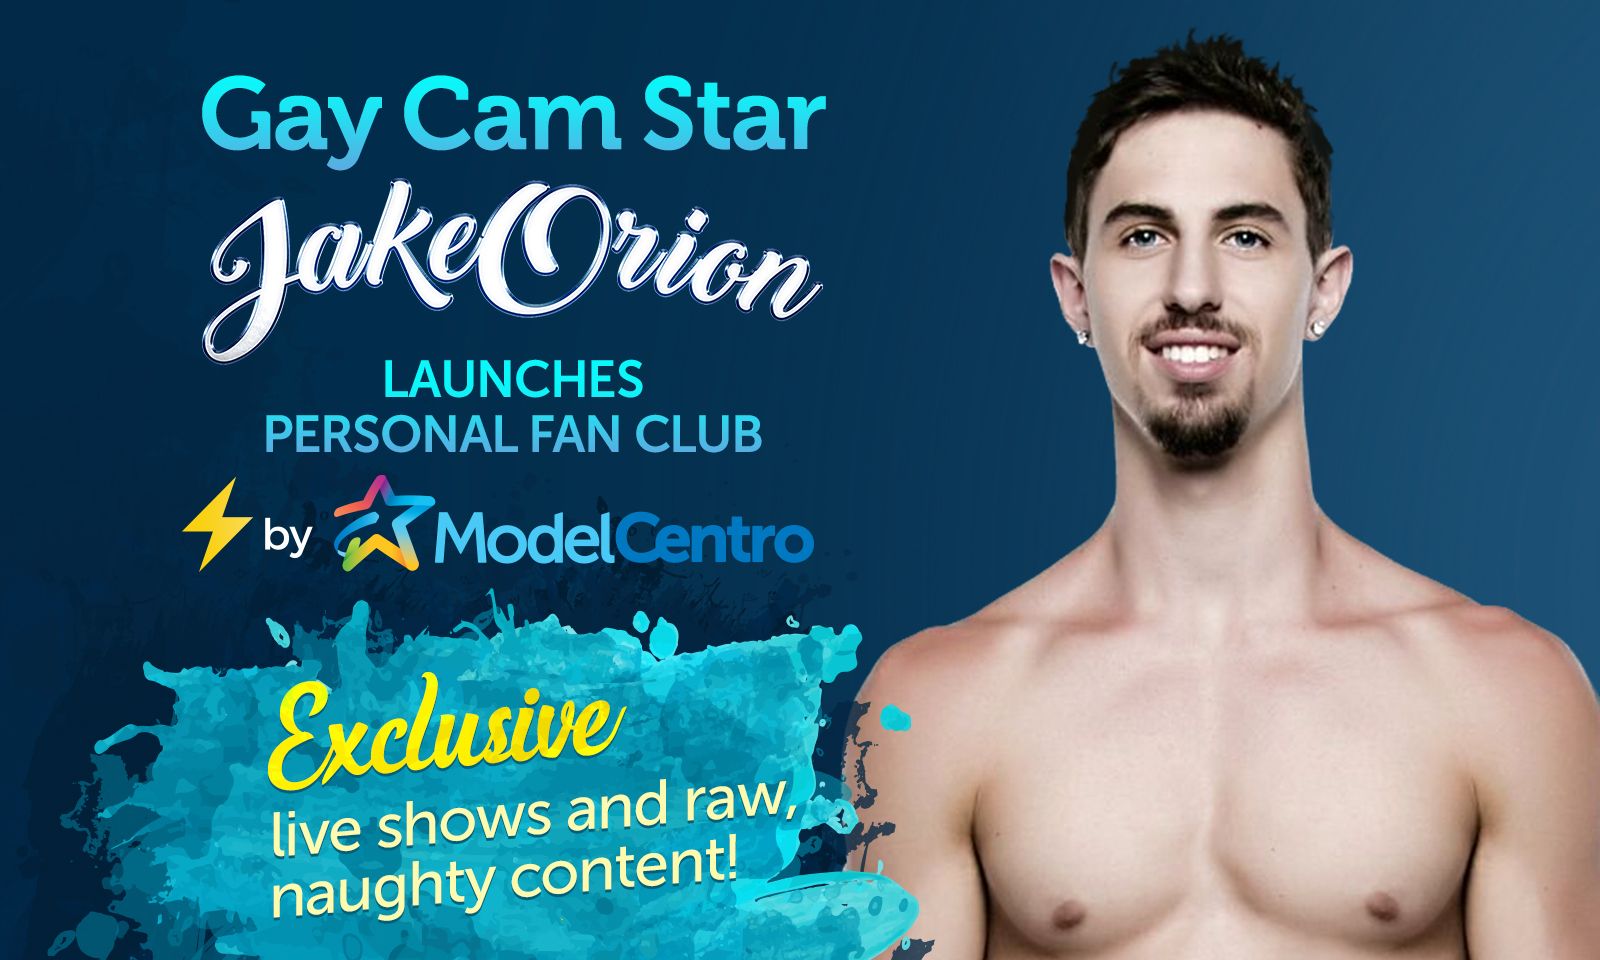 Male Cam Star Jake Orion Earns Official ModelCentro Site